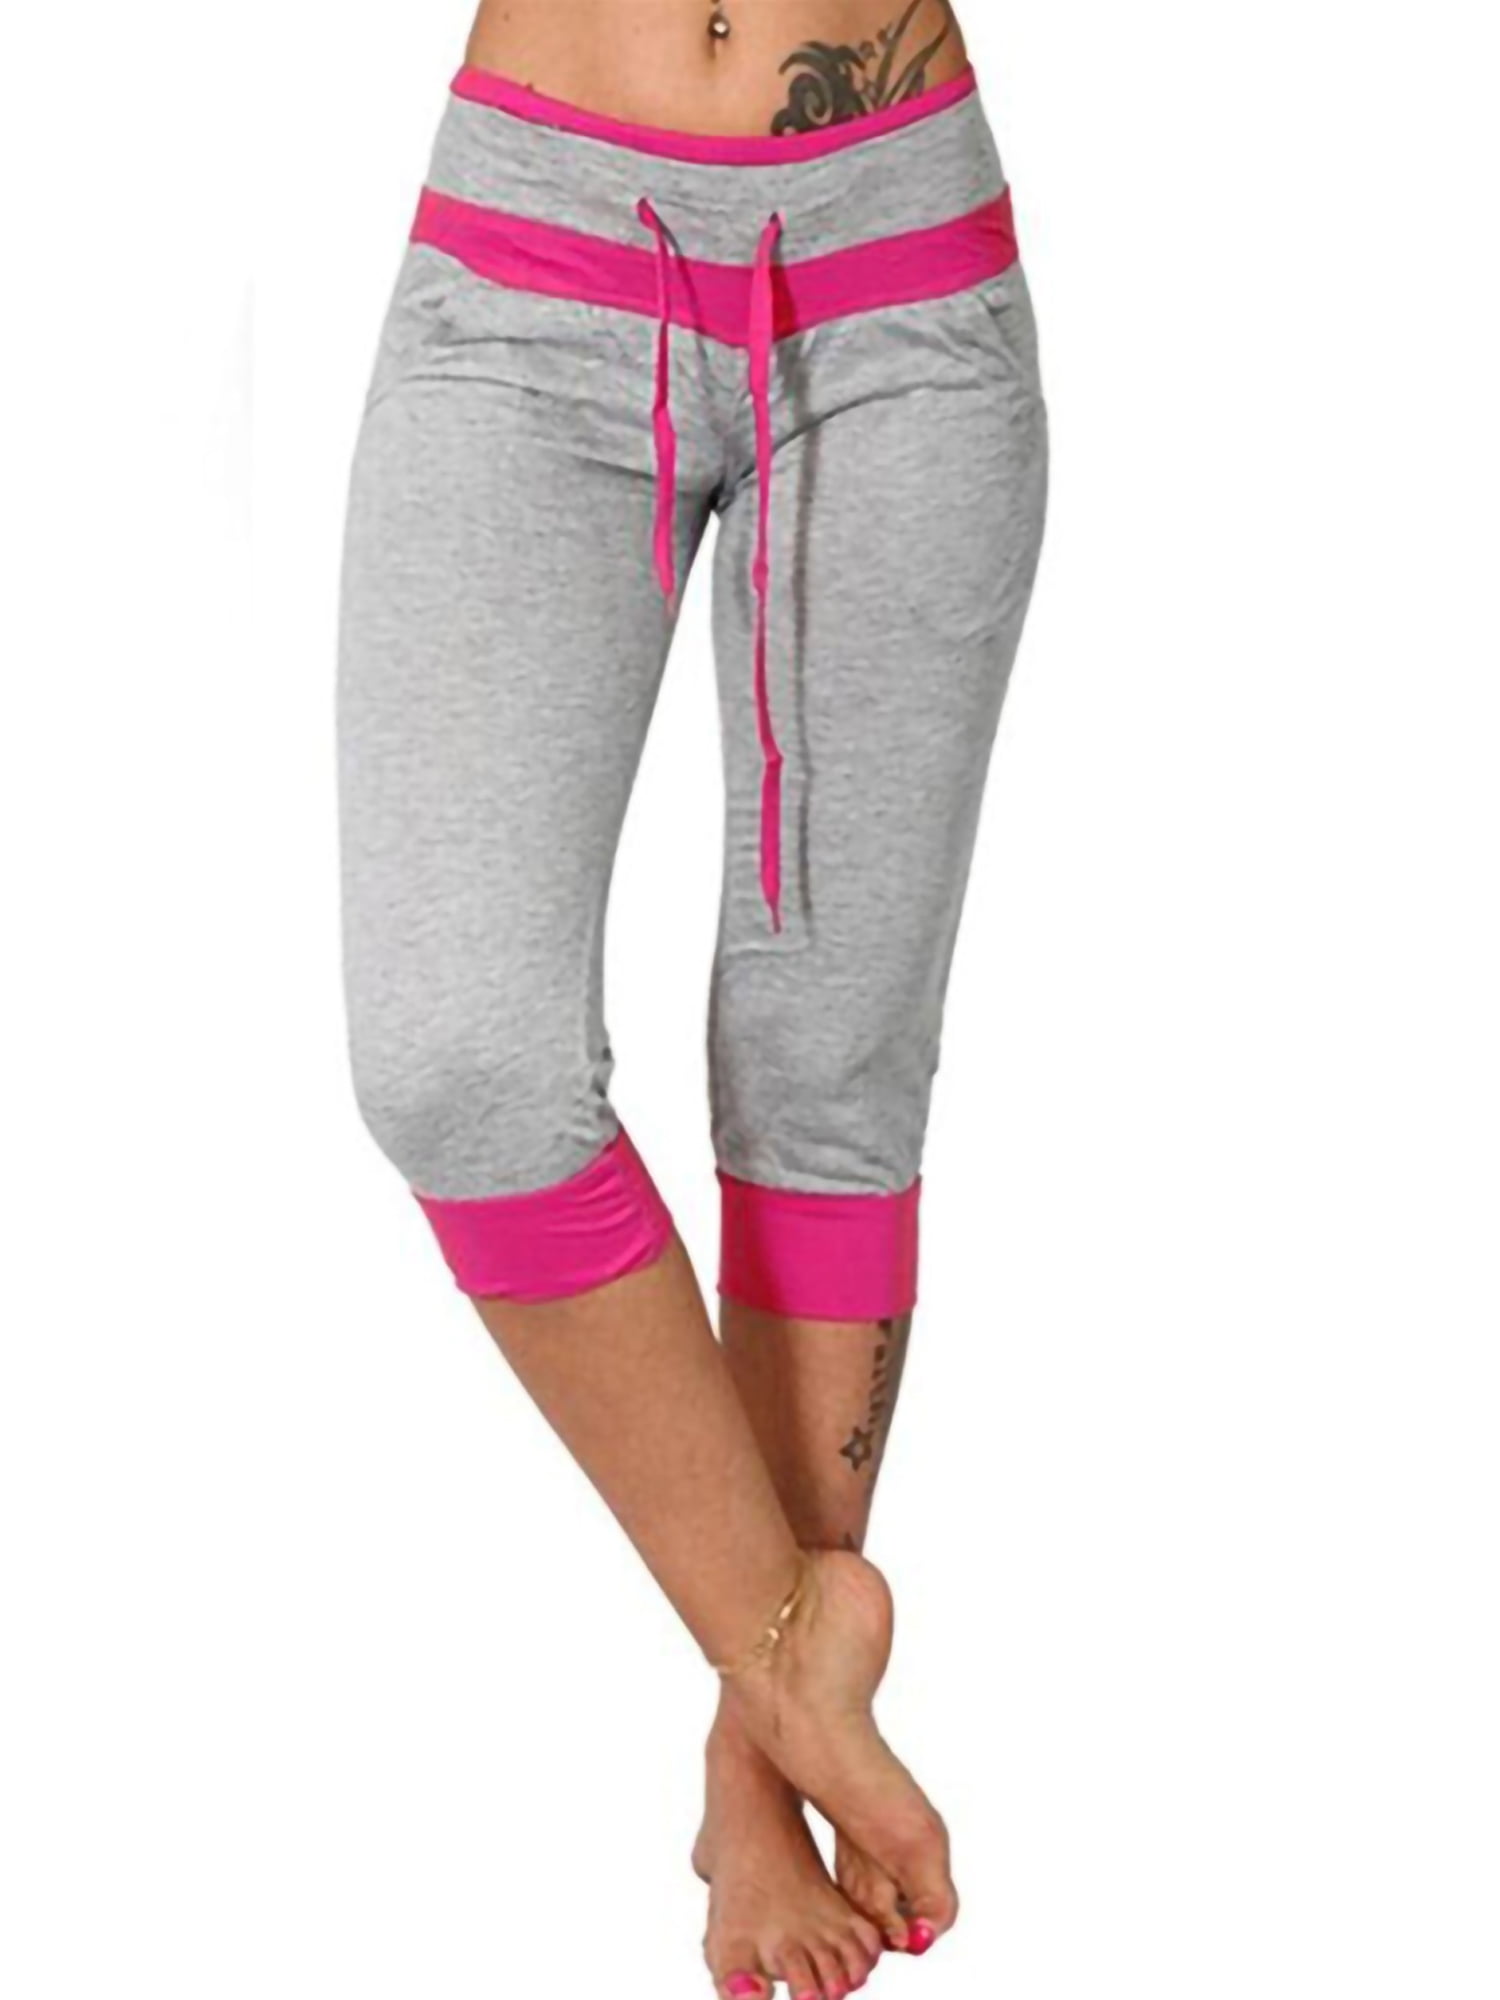 Details about   Women Sknny Yoga Cropped Leggings Gym Pants 3/4 Length Trousers Sports Bottoms 